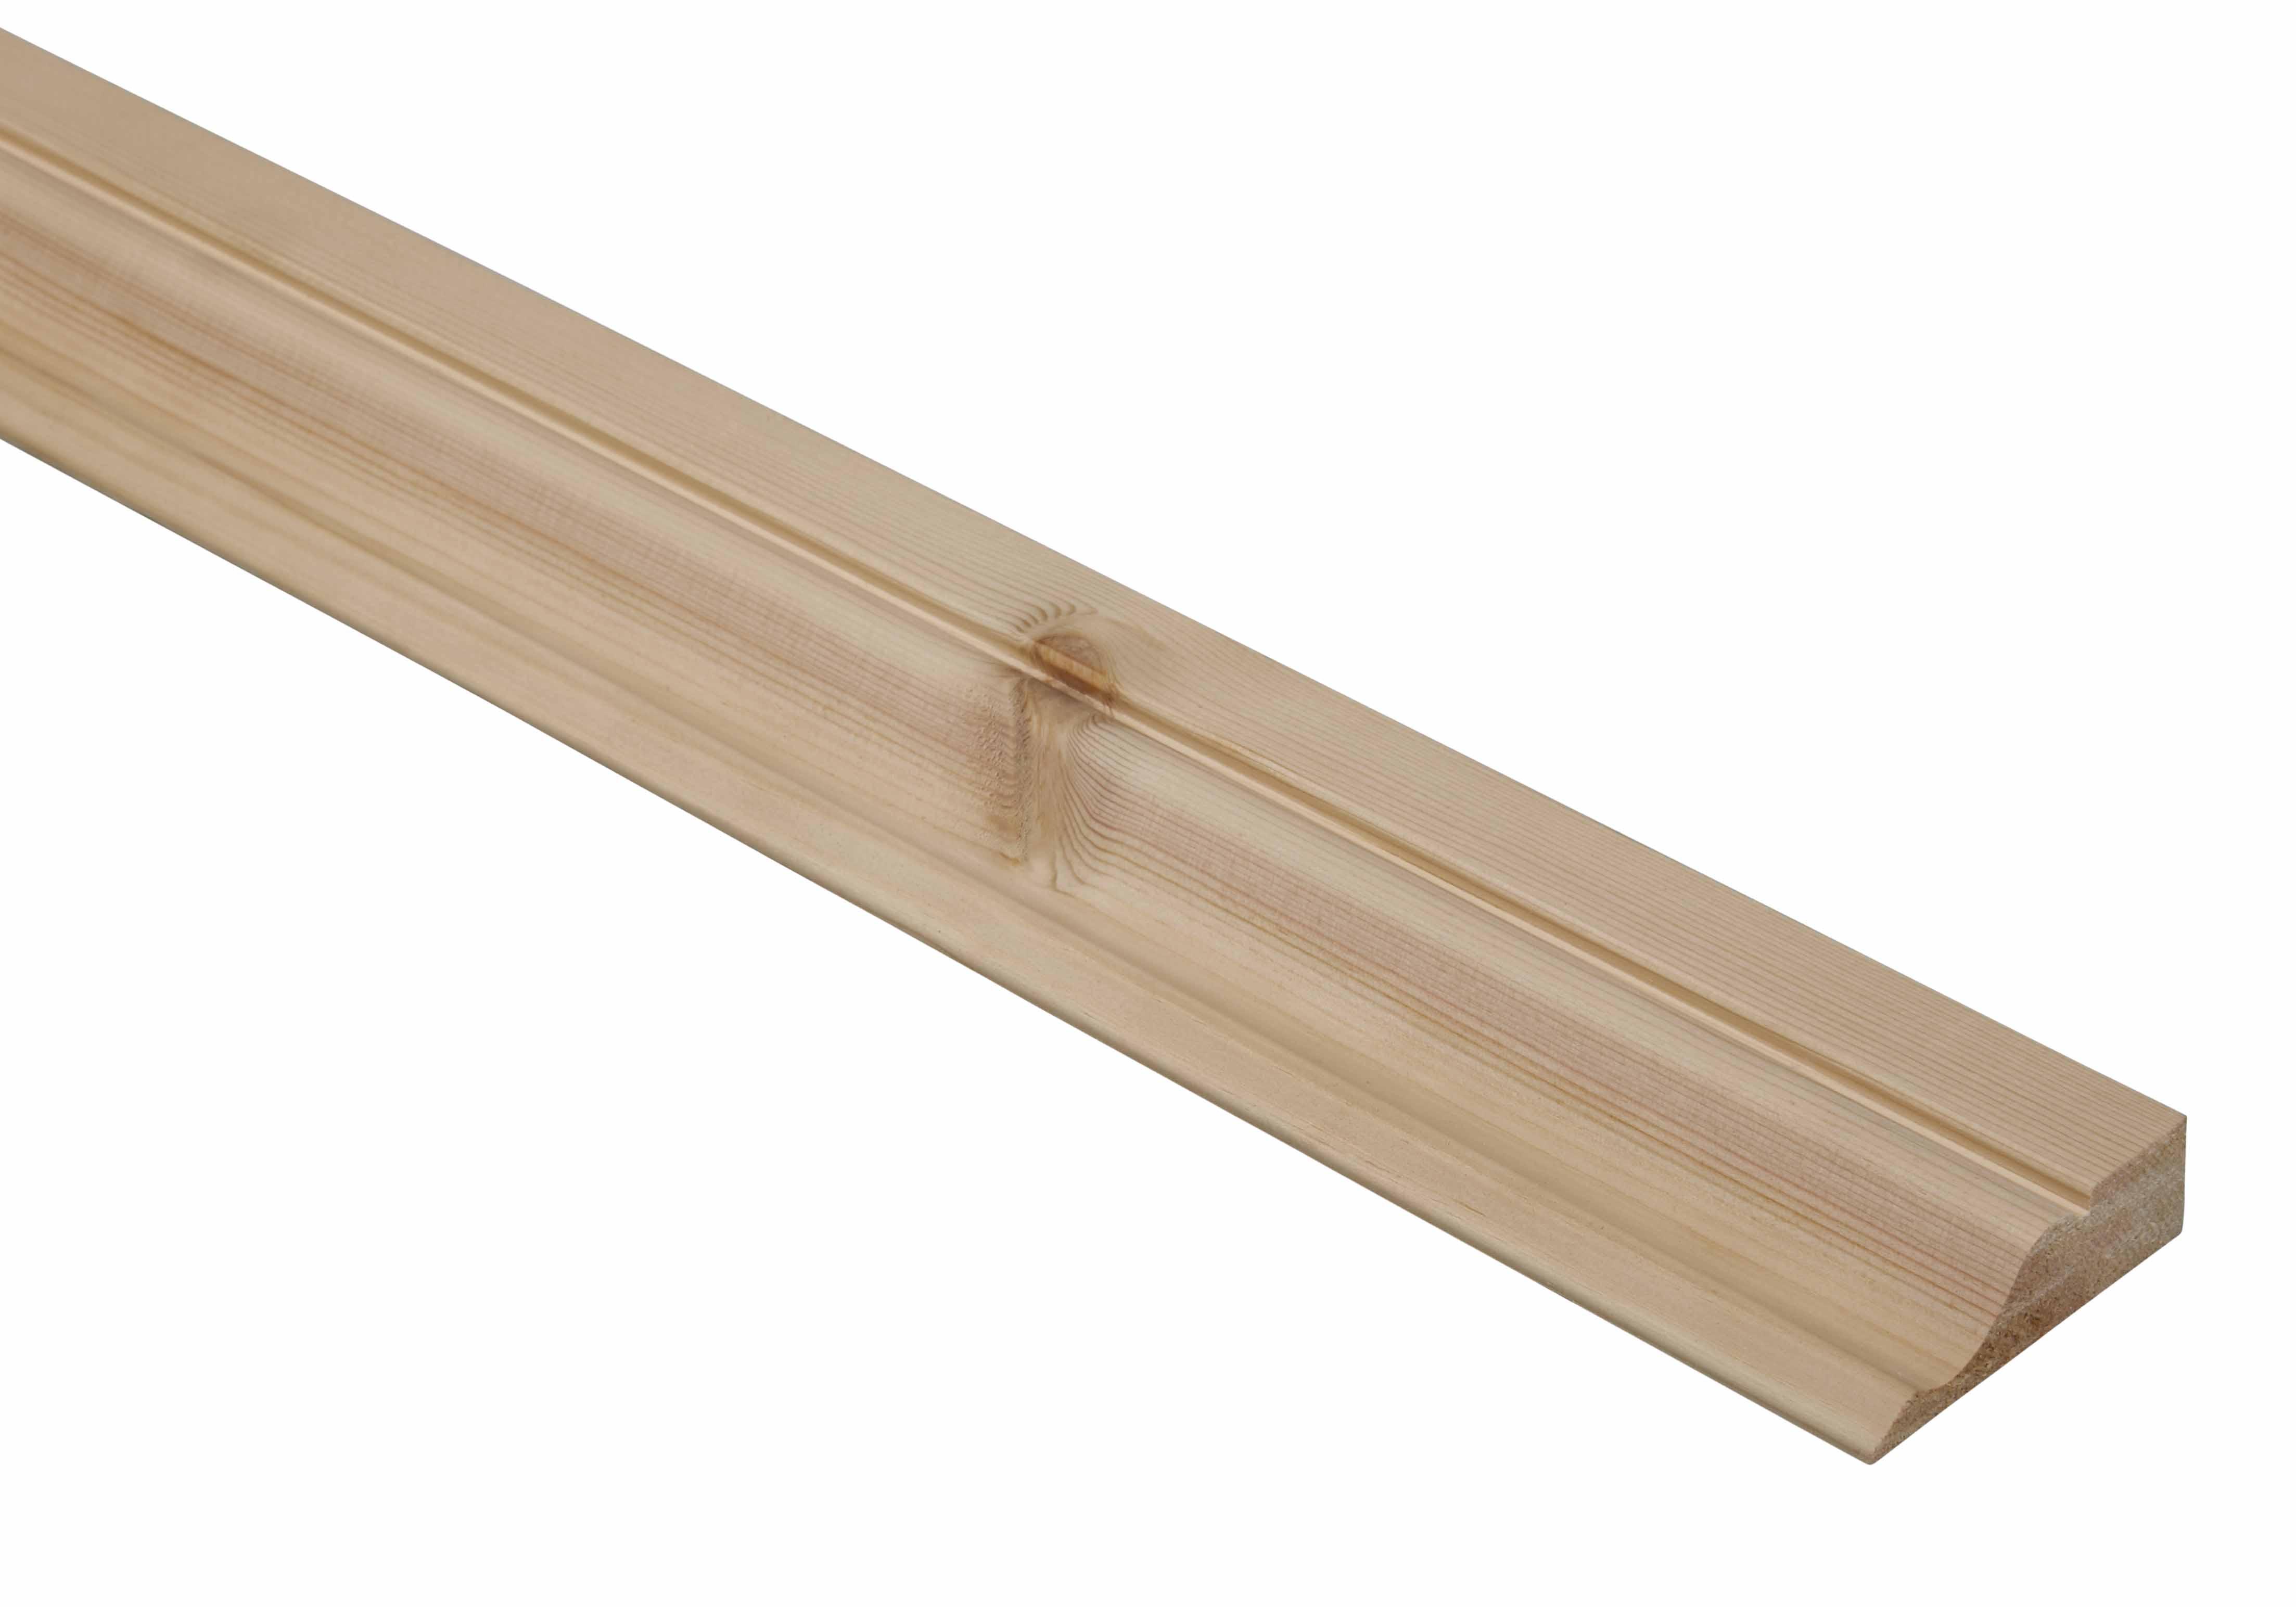 10 Pine Ogee Architrave Mouldings 18 x 58 x 2100mm